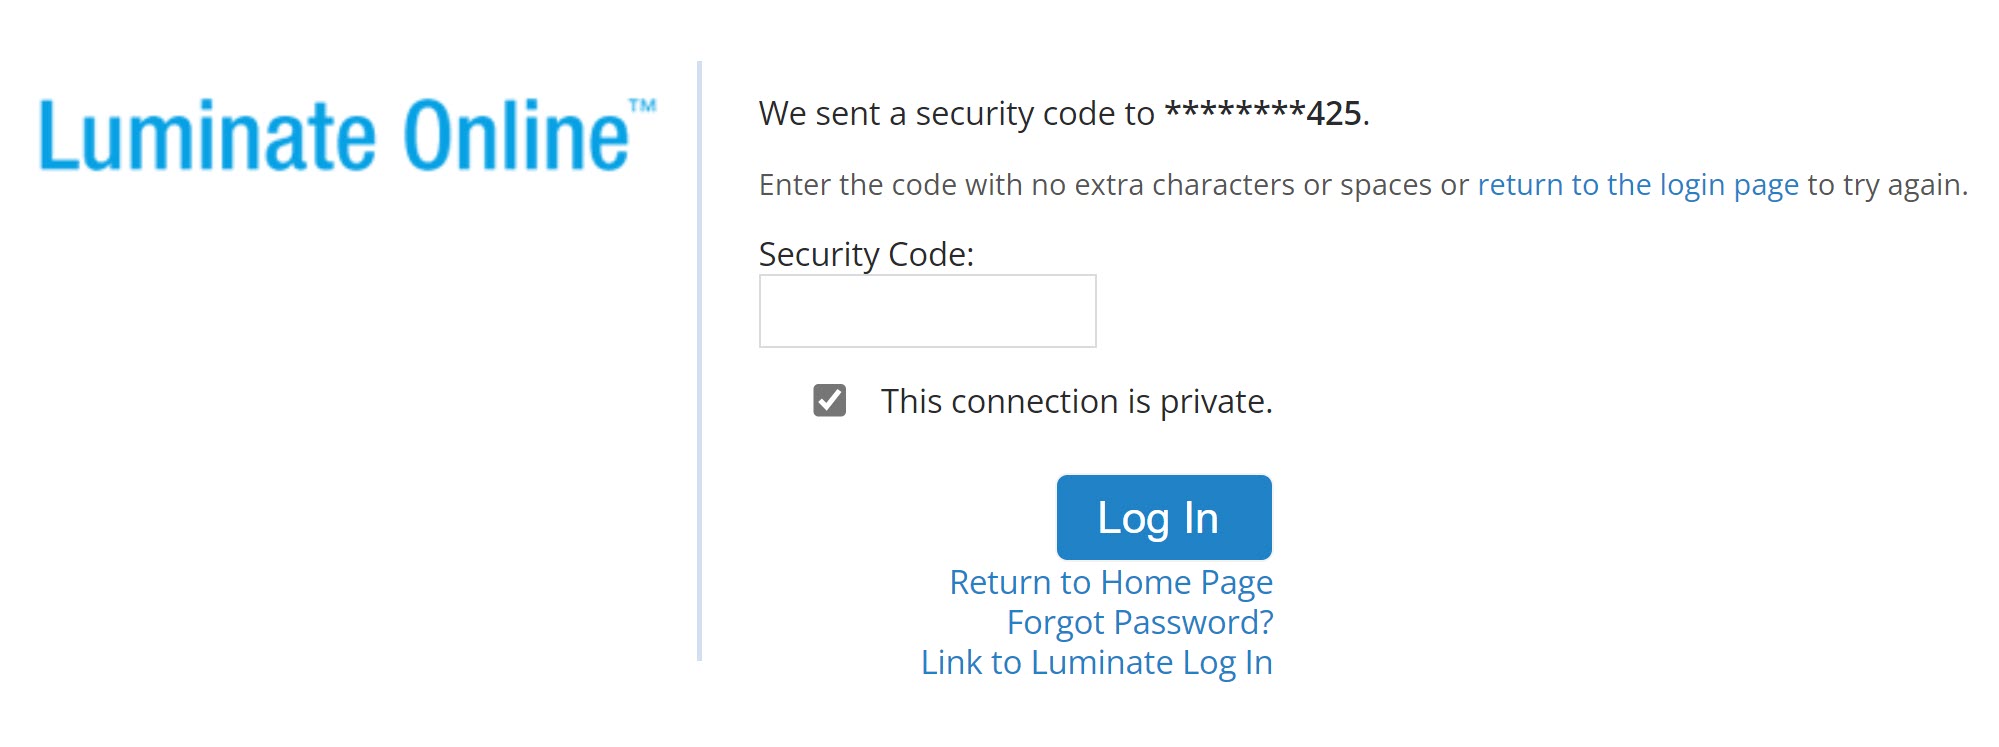 Luminate Online log in screen with a field to enter an SMS code